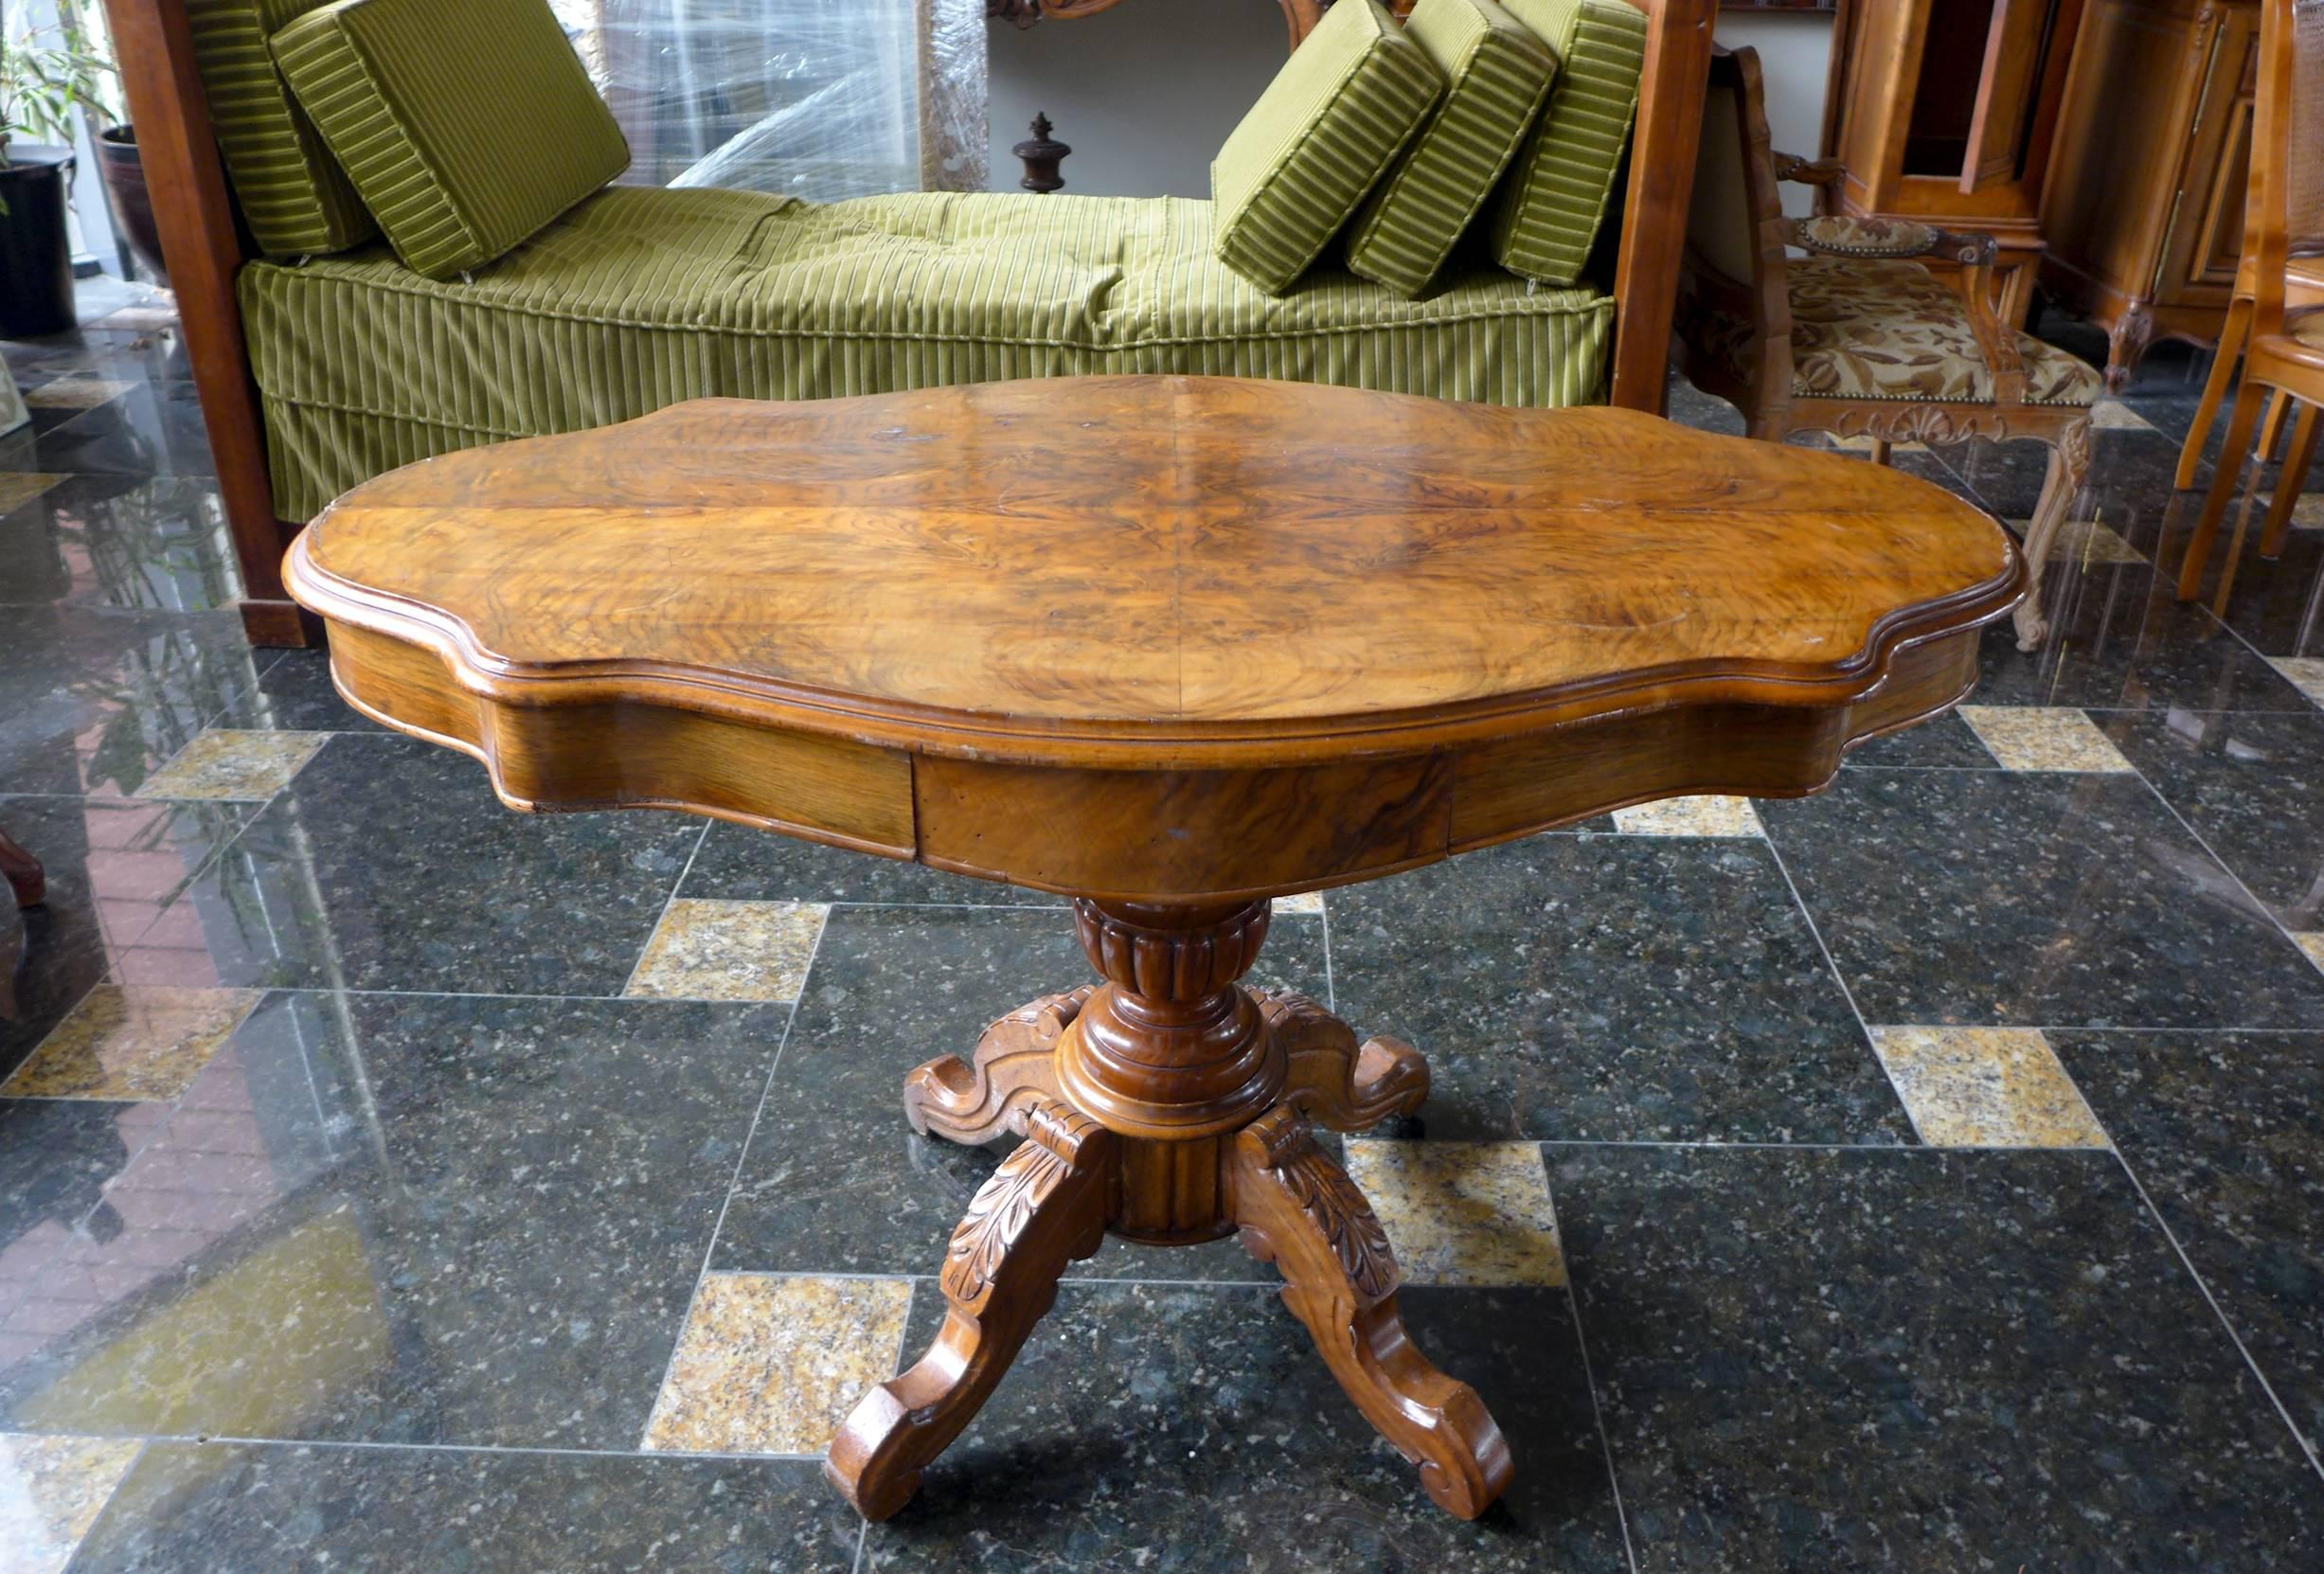 19th century Victorian style walnut centre table with beautifully figured shaped, tilt-top and moulded edge, standing on carved turned column and four carved legs with floral figures. There are two small drawers from the narrow side. The table is in